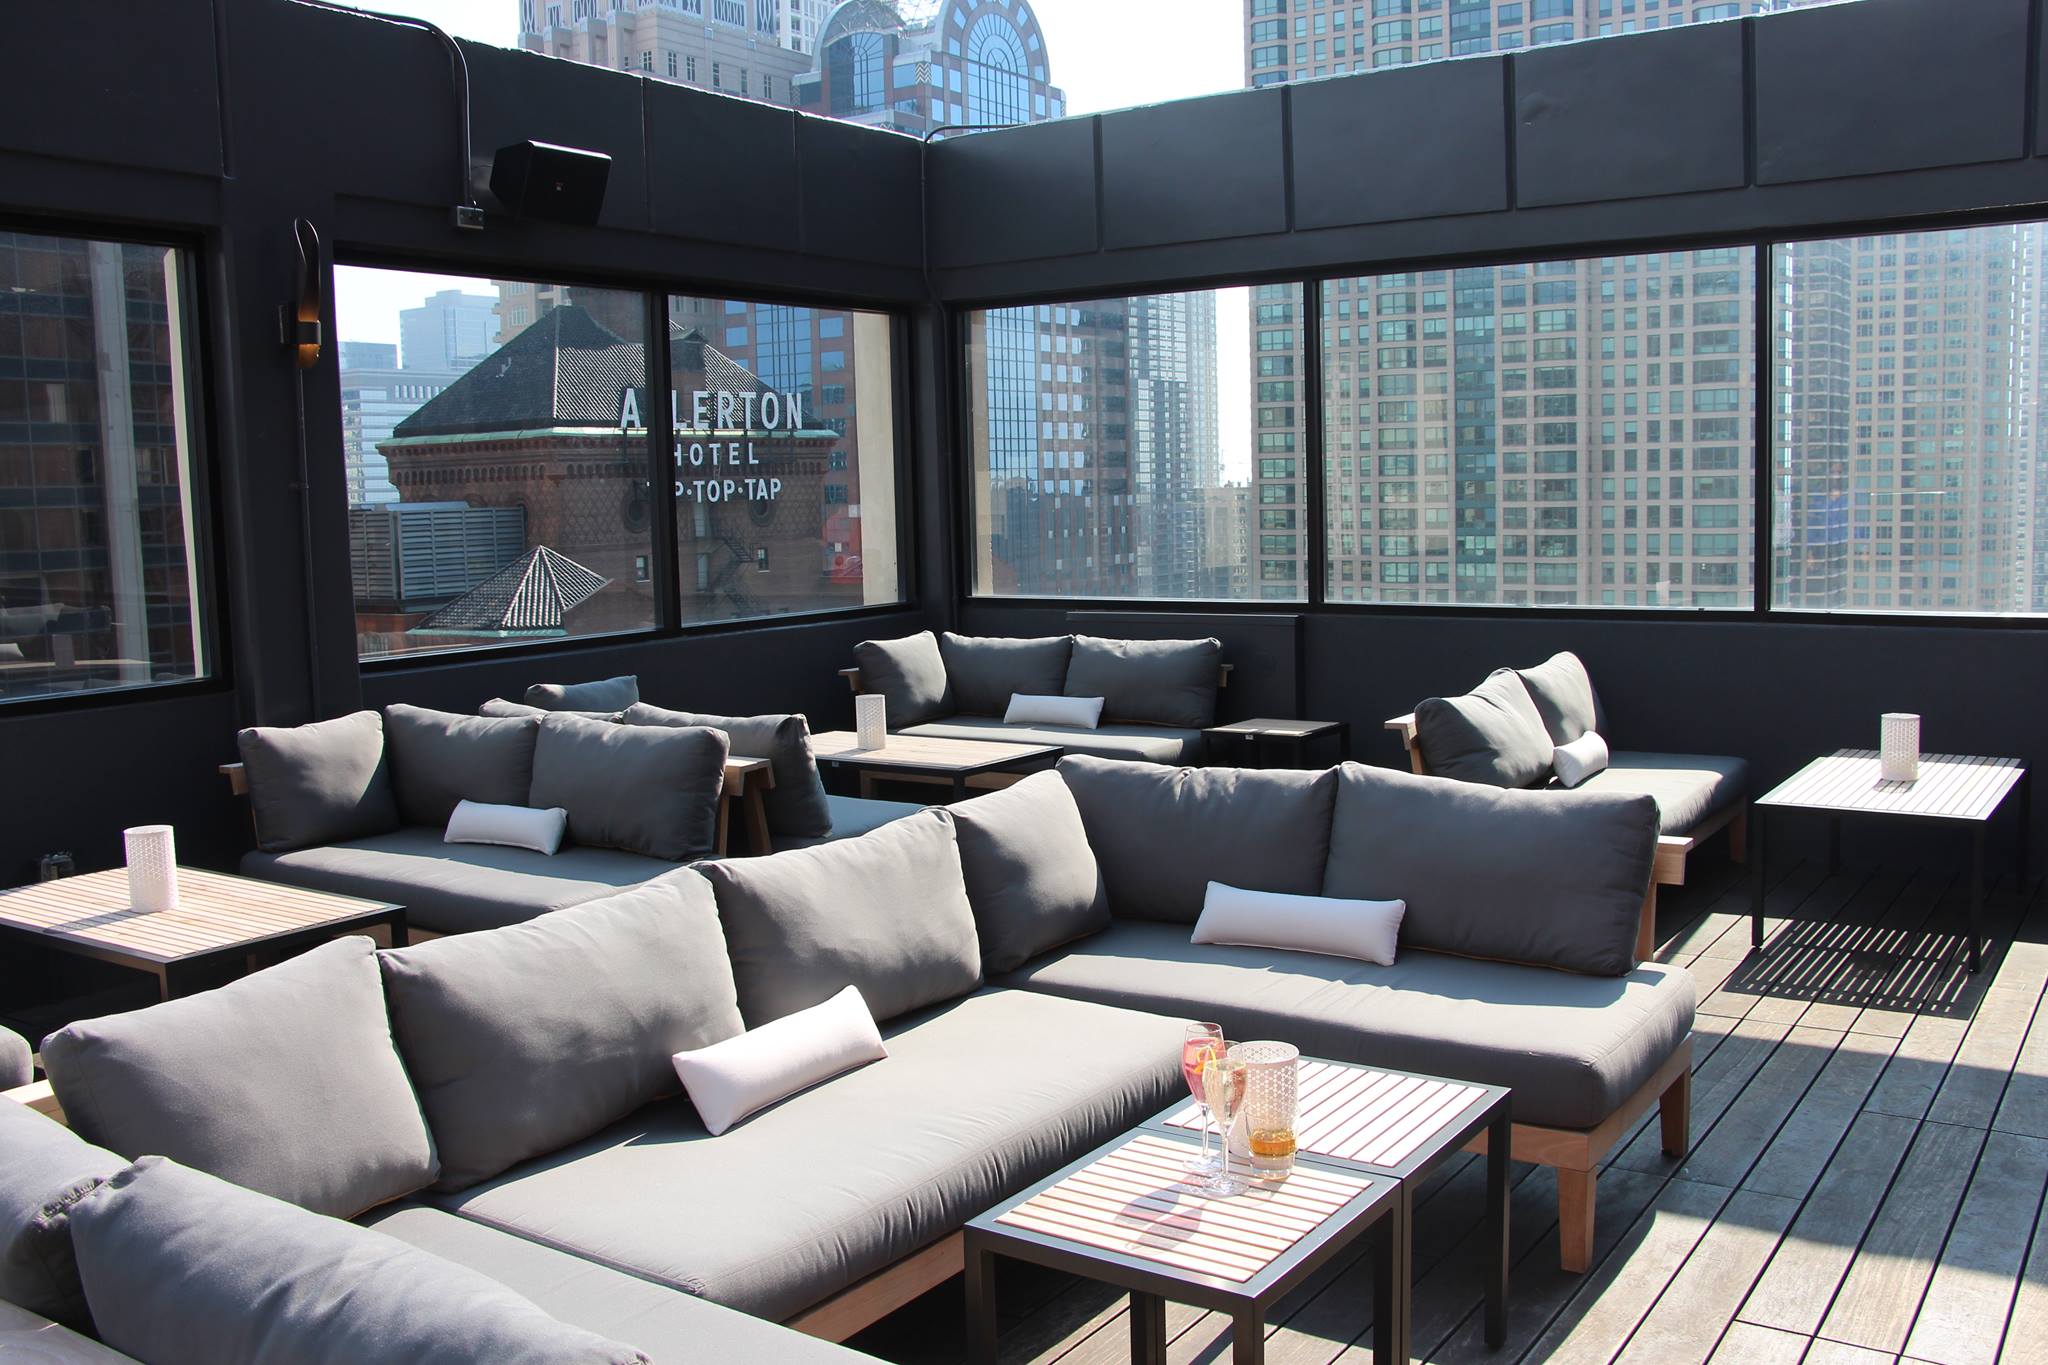 52eighty – chicago rooftop bar